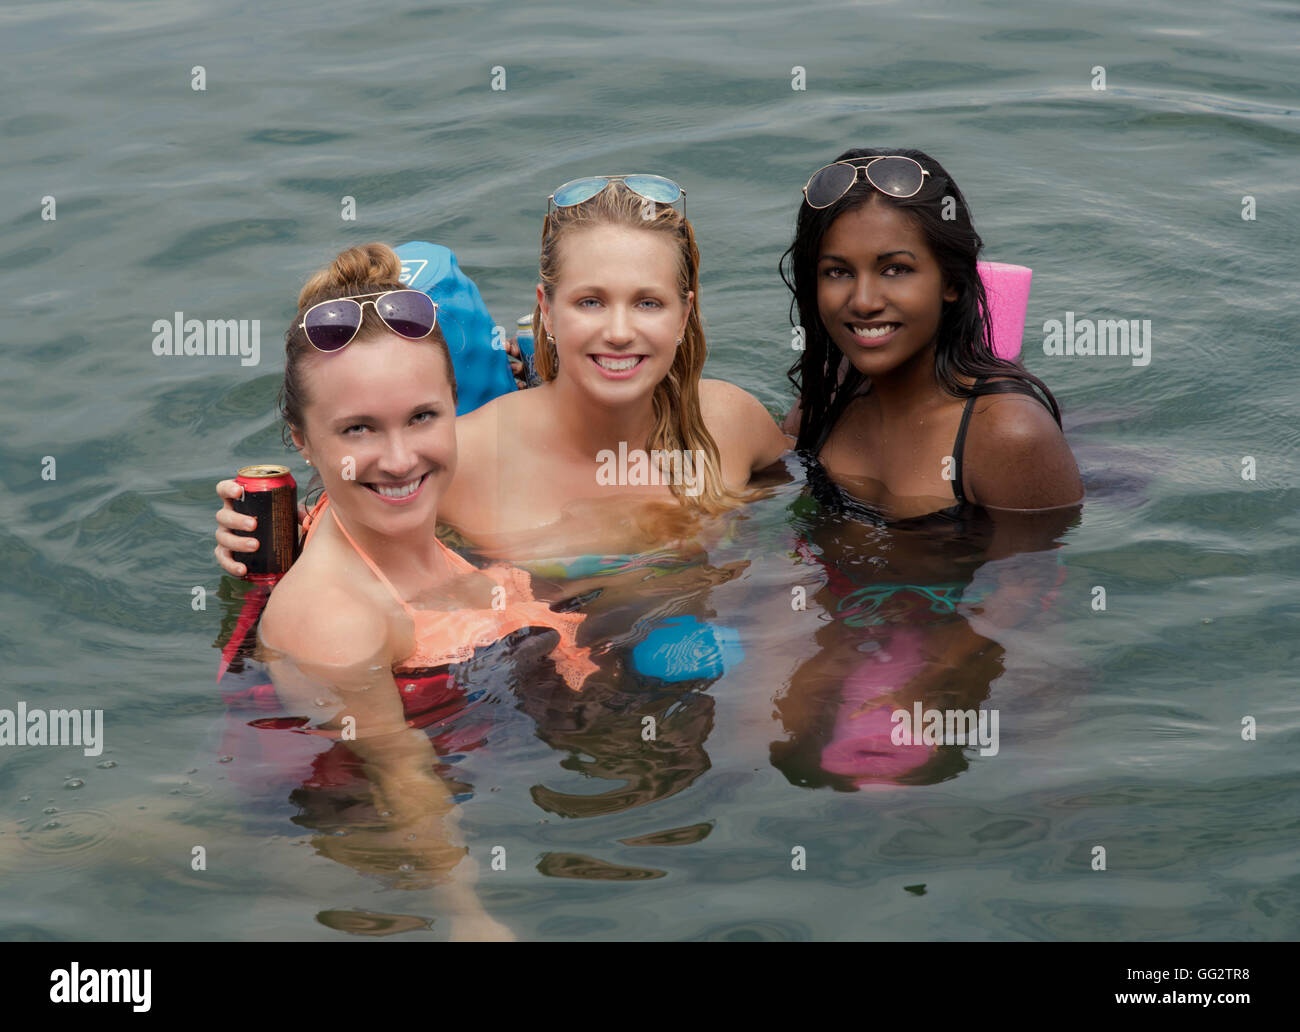 A portrait of three 20's women enjoy a summer float in a lake. Stock Photo